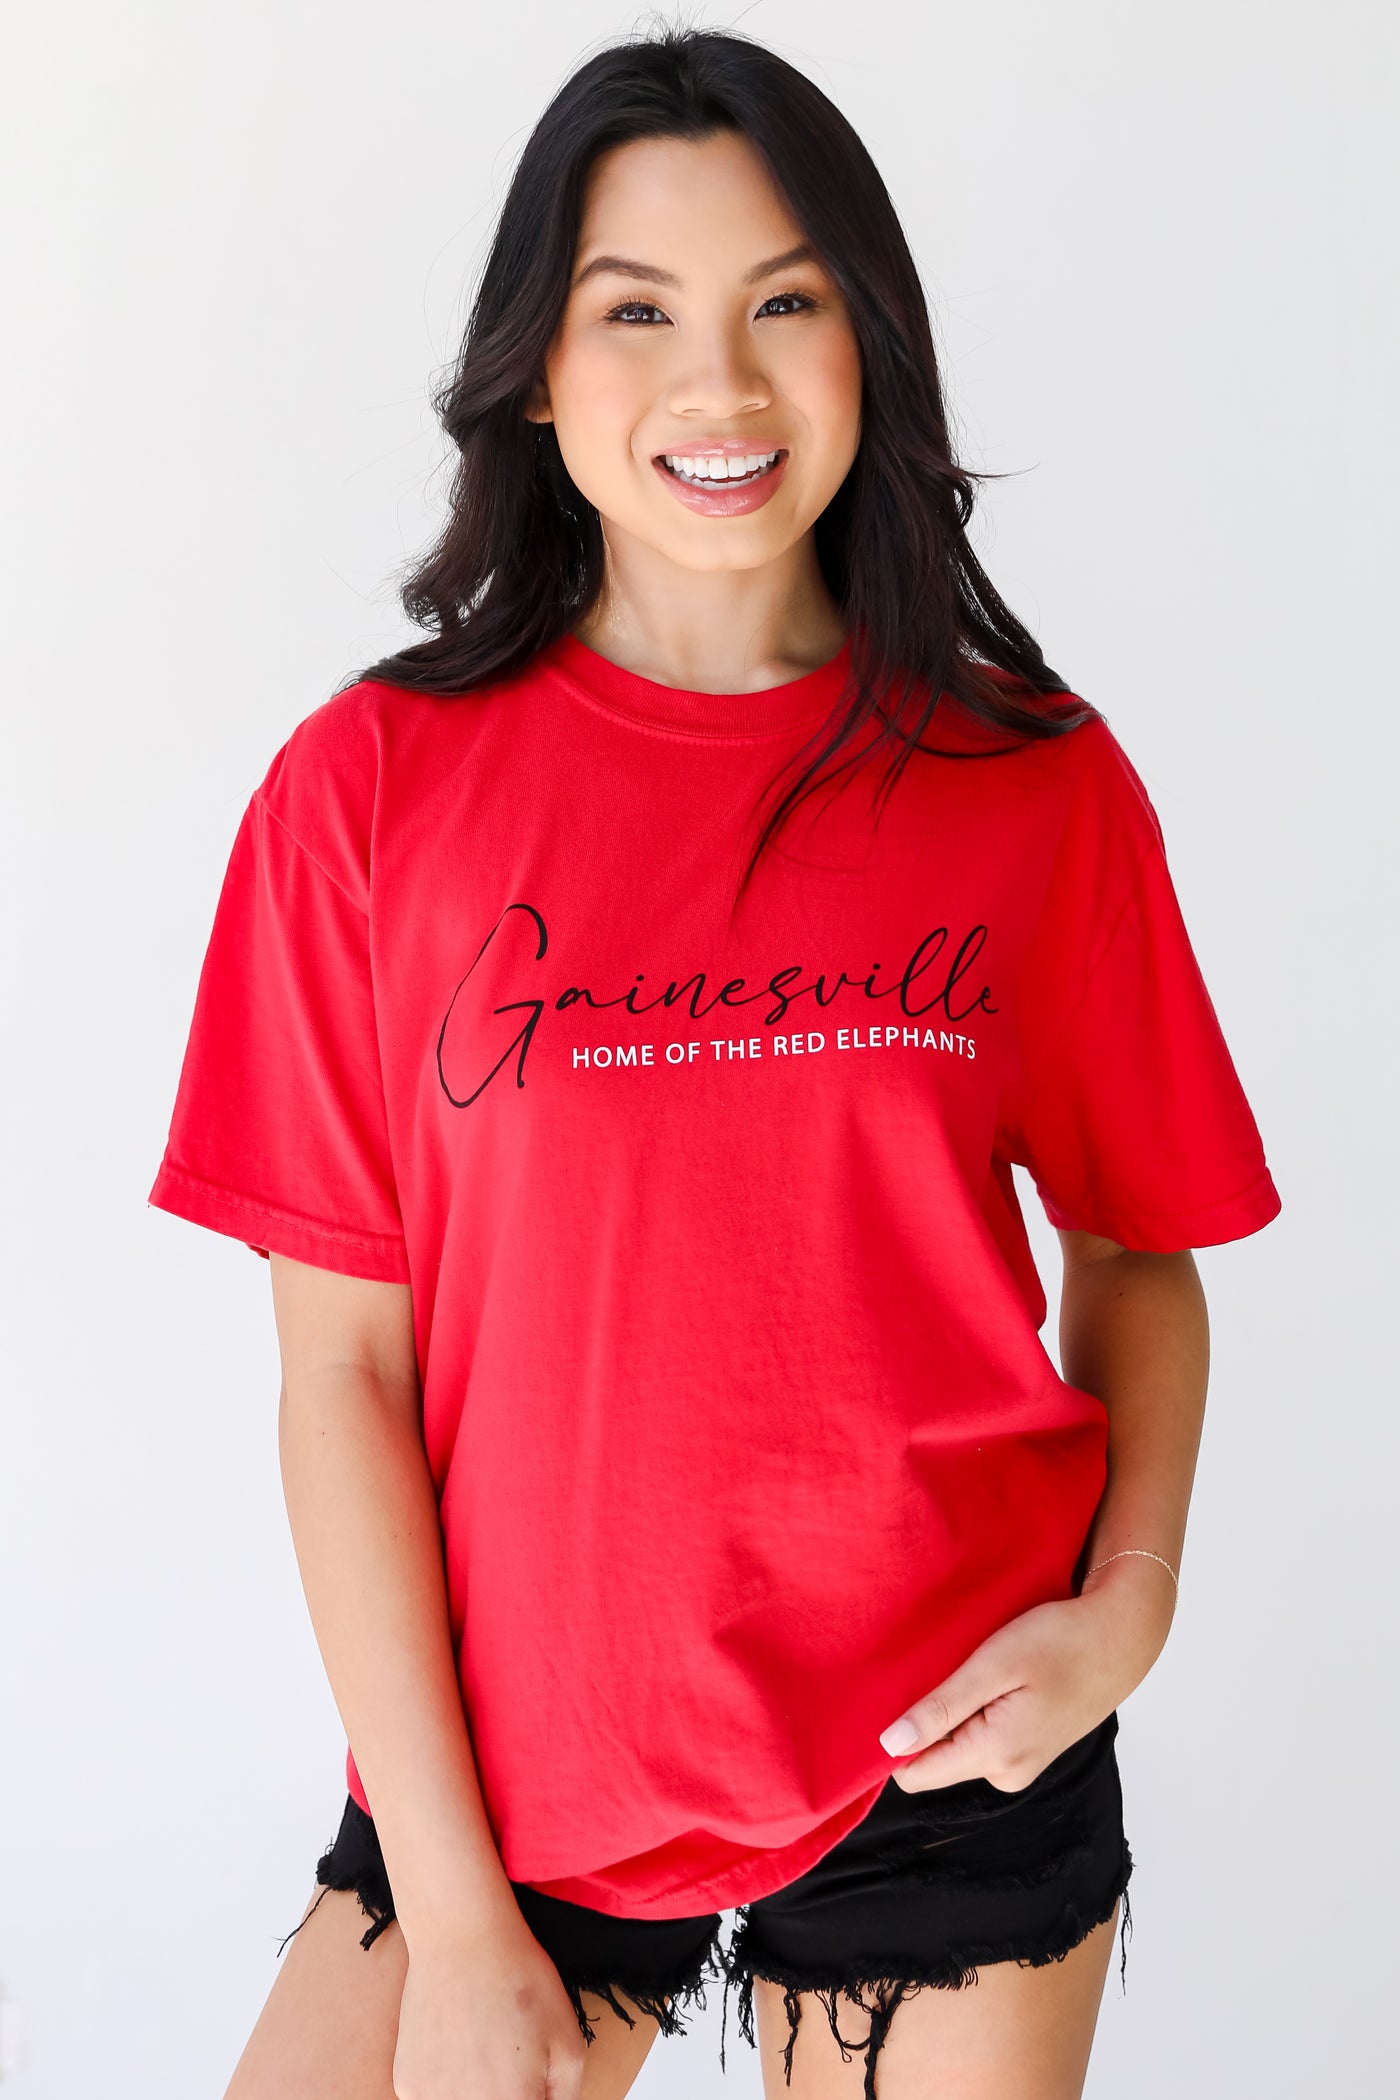 Gainesville Home Of The Red Elephants Tee